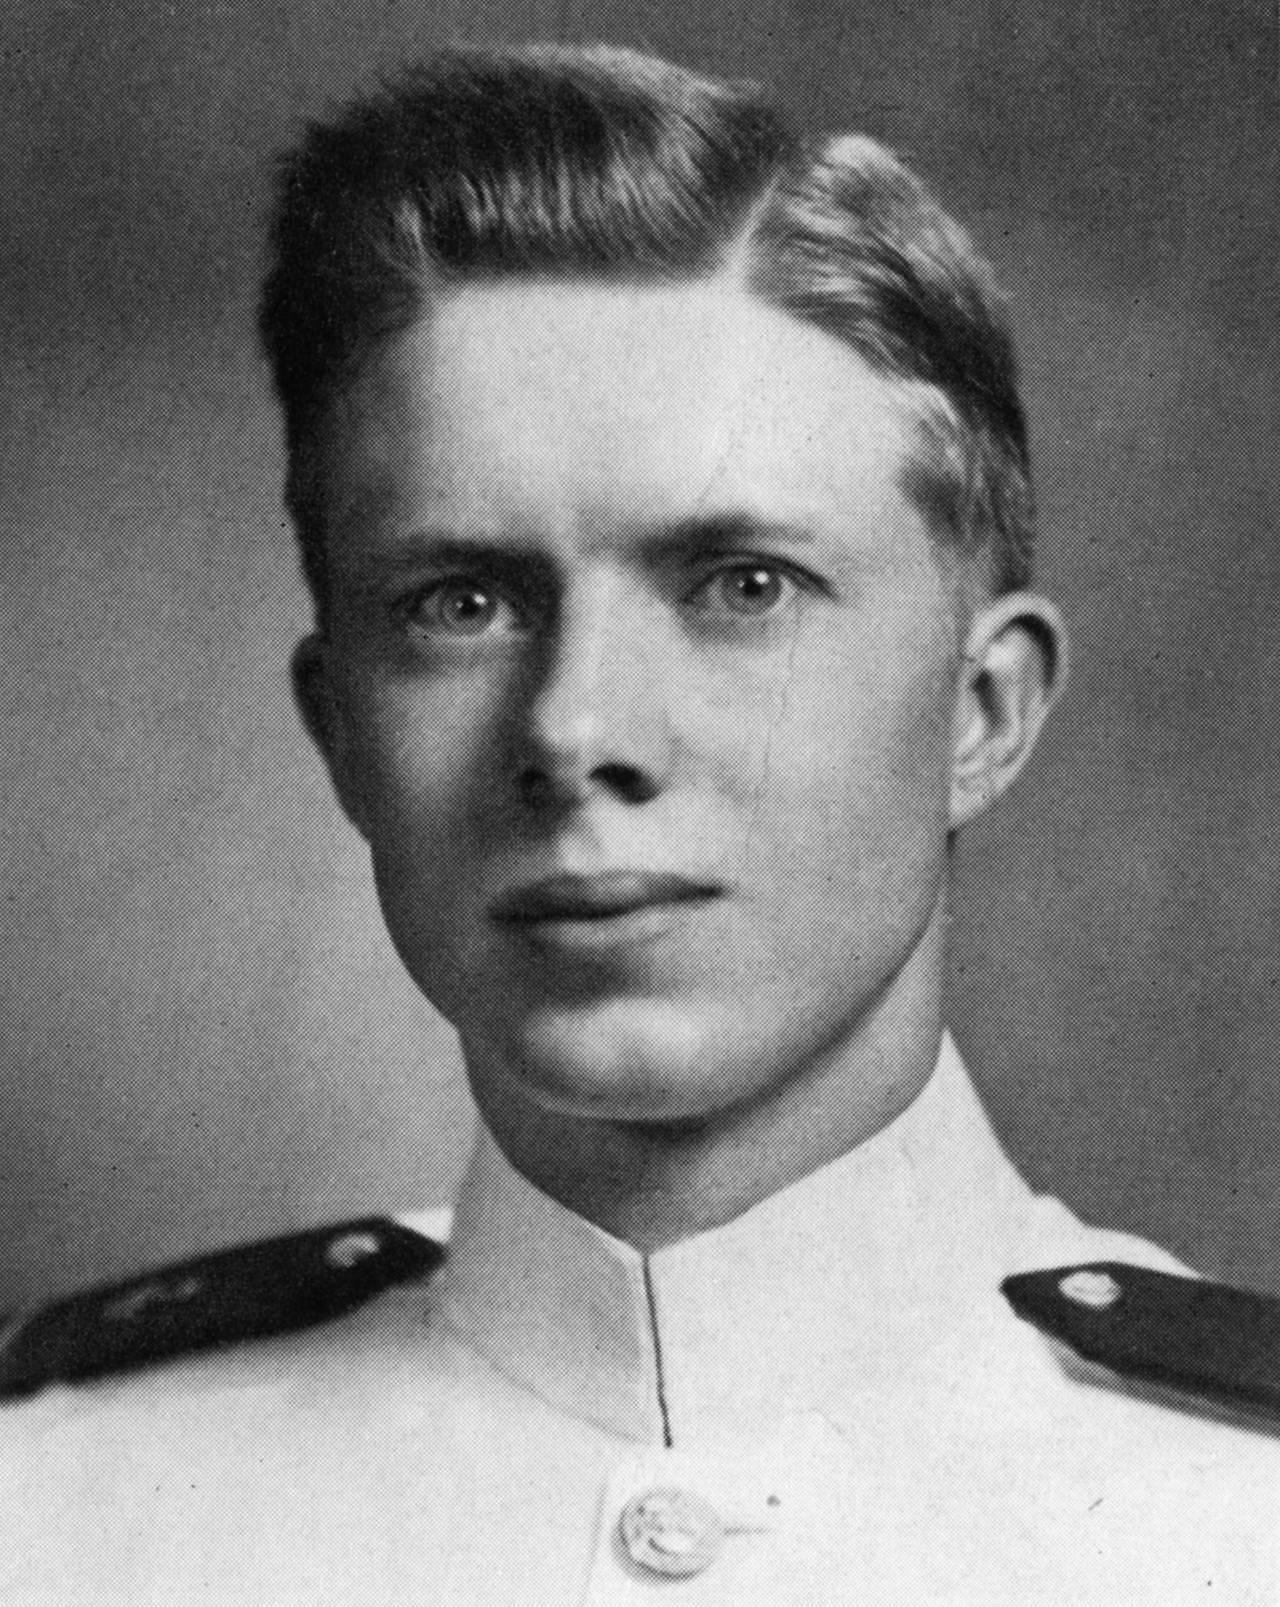 Midshipman James Earl Carter Jr. in 1946, the year he graduated from the Naval Academy in Annapolis. He graduated in three years as part of a wartime effort to replace officers dying in World War II.